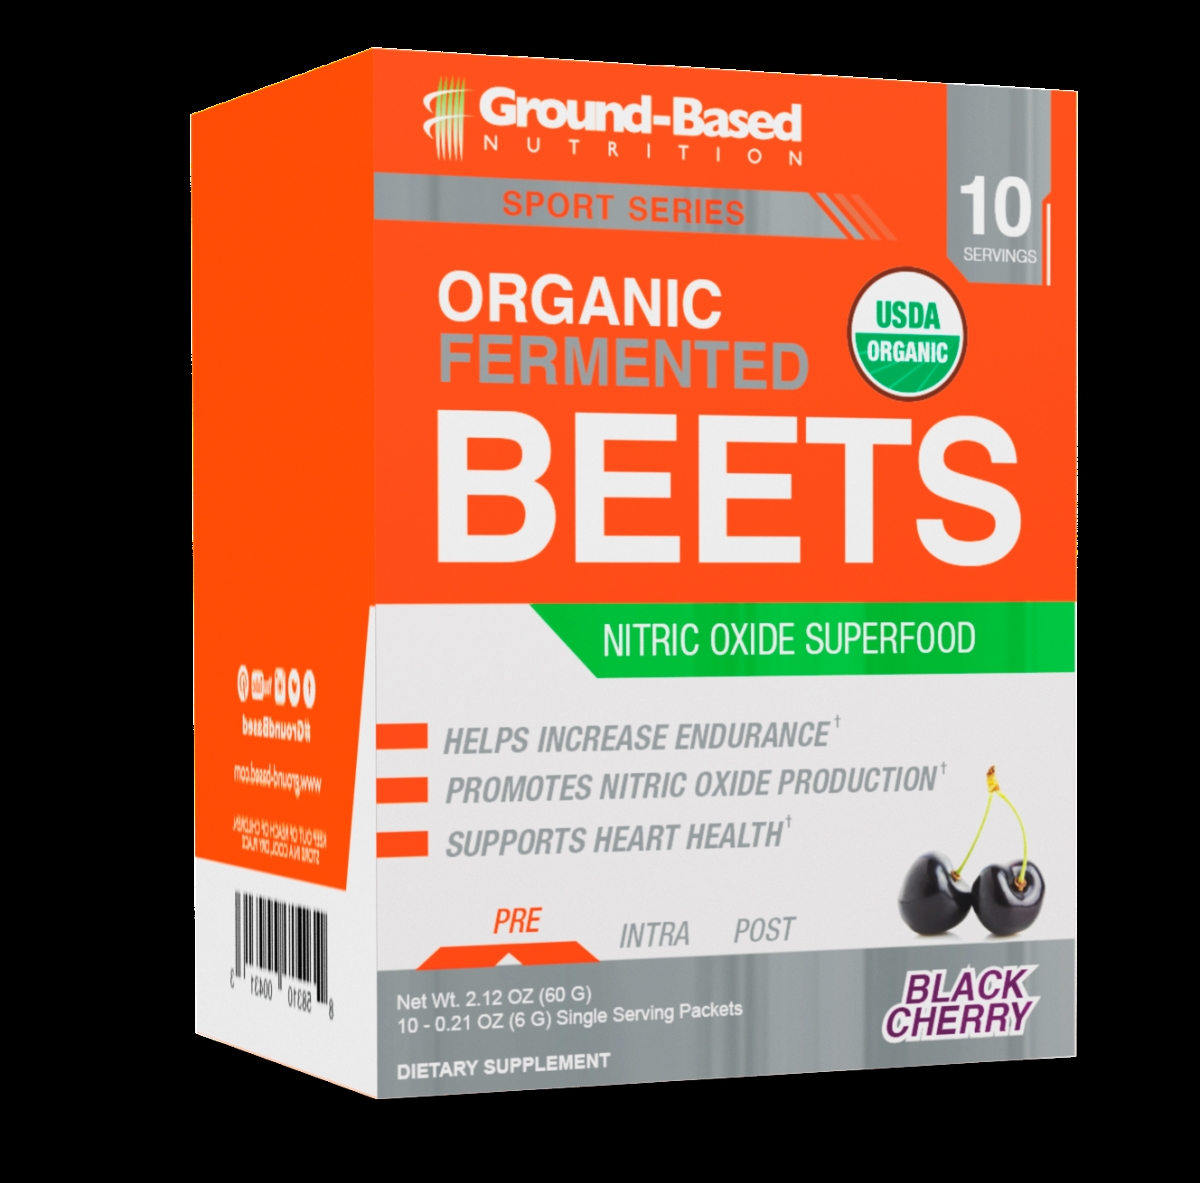 2160013 Black Cherry Organic Fermented Beets - Pack Of 10